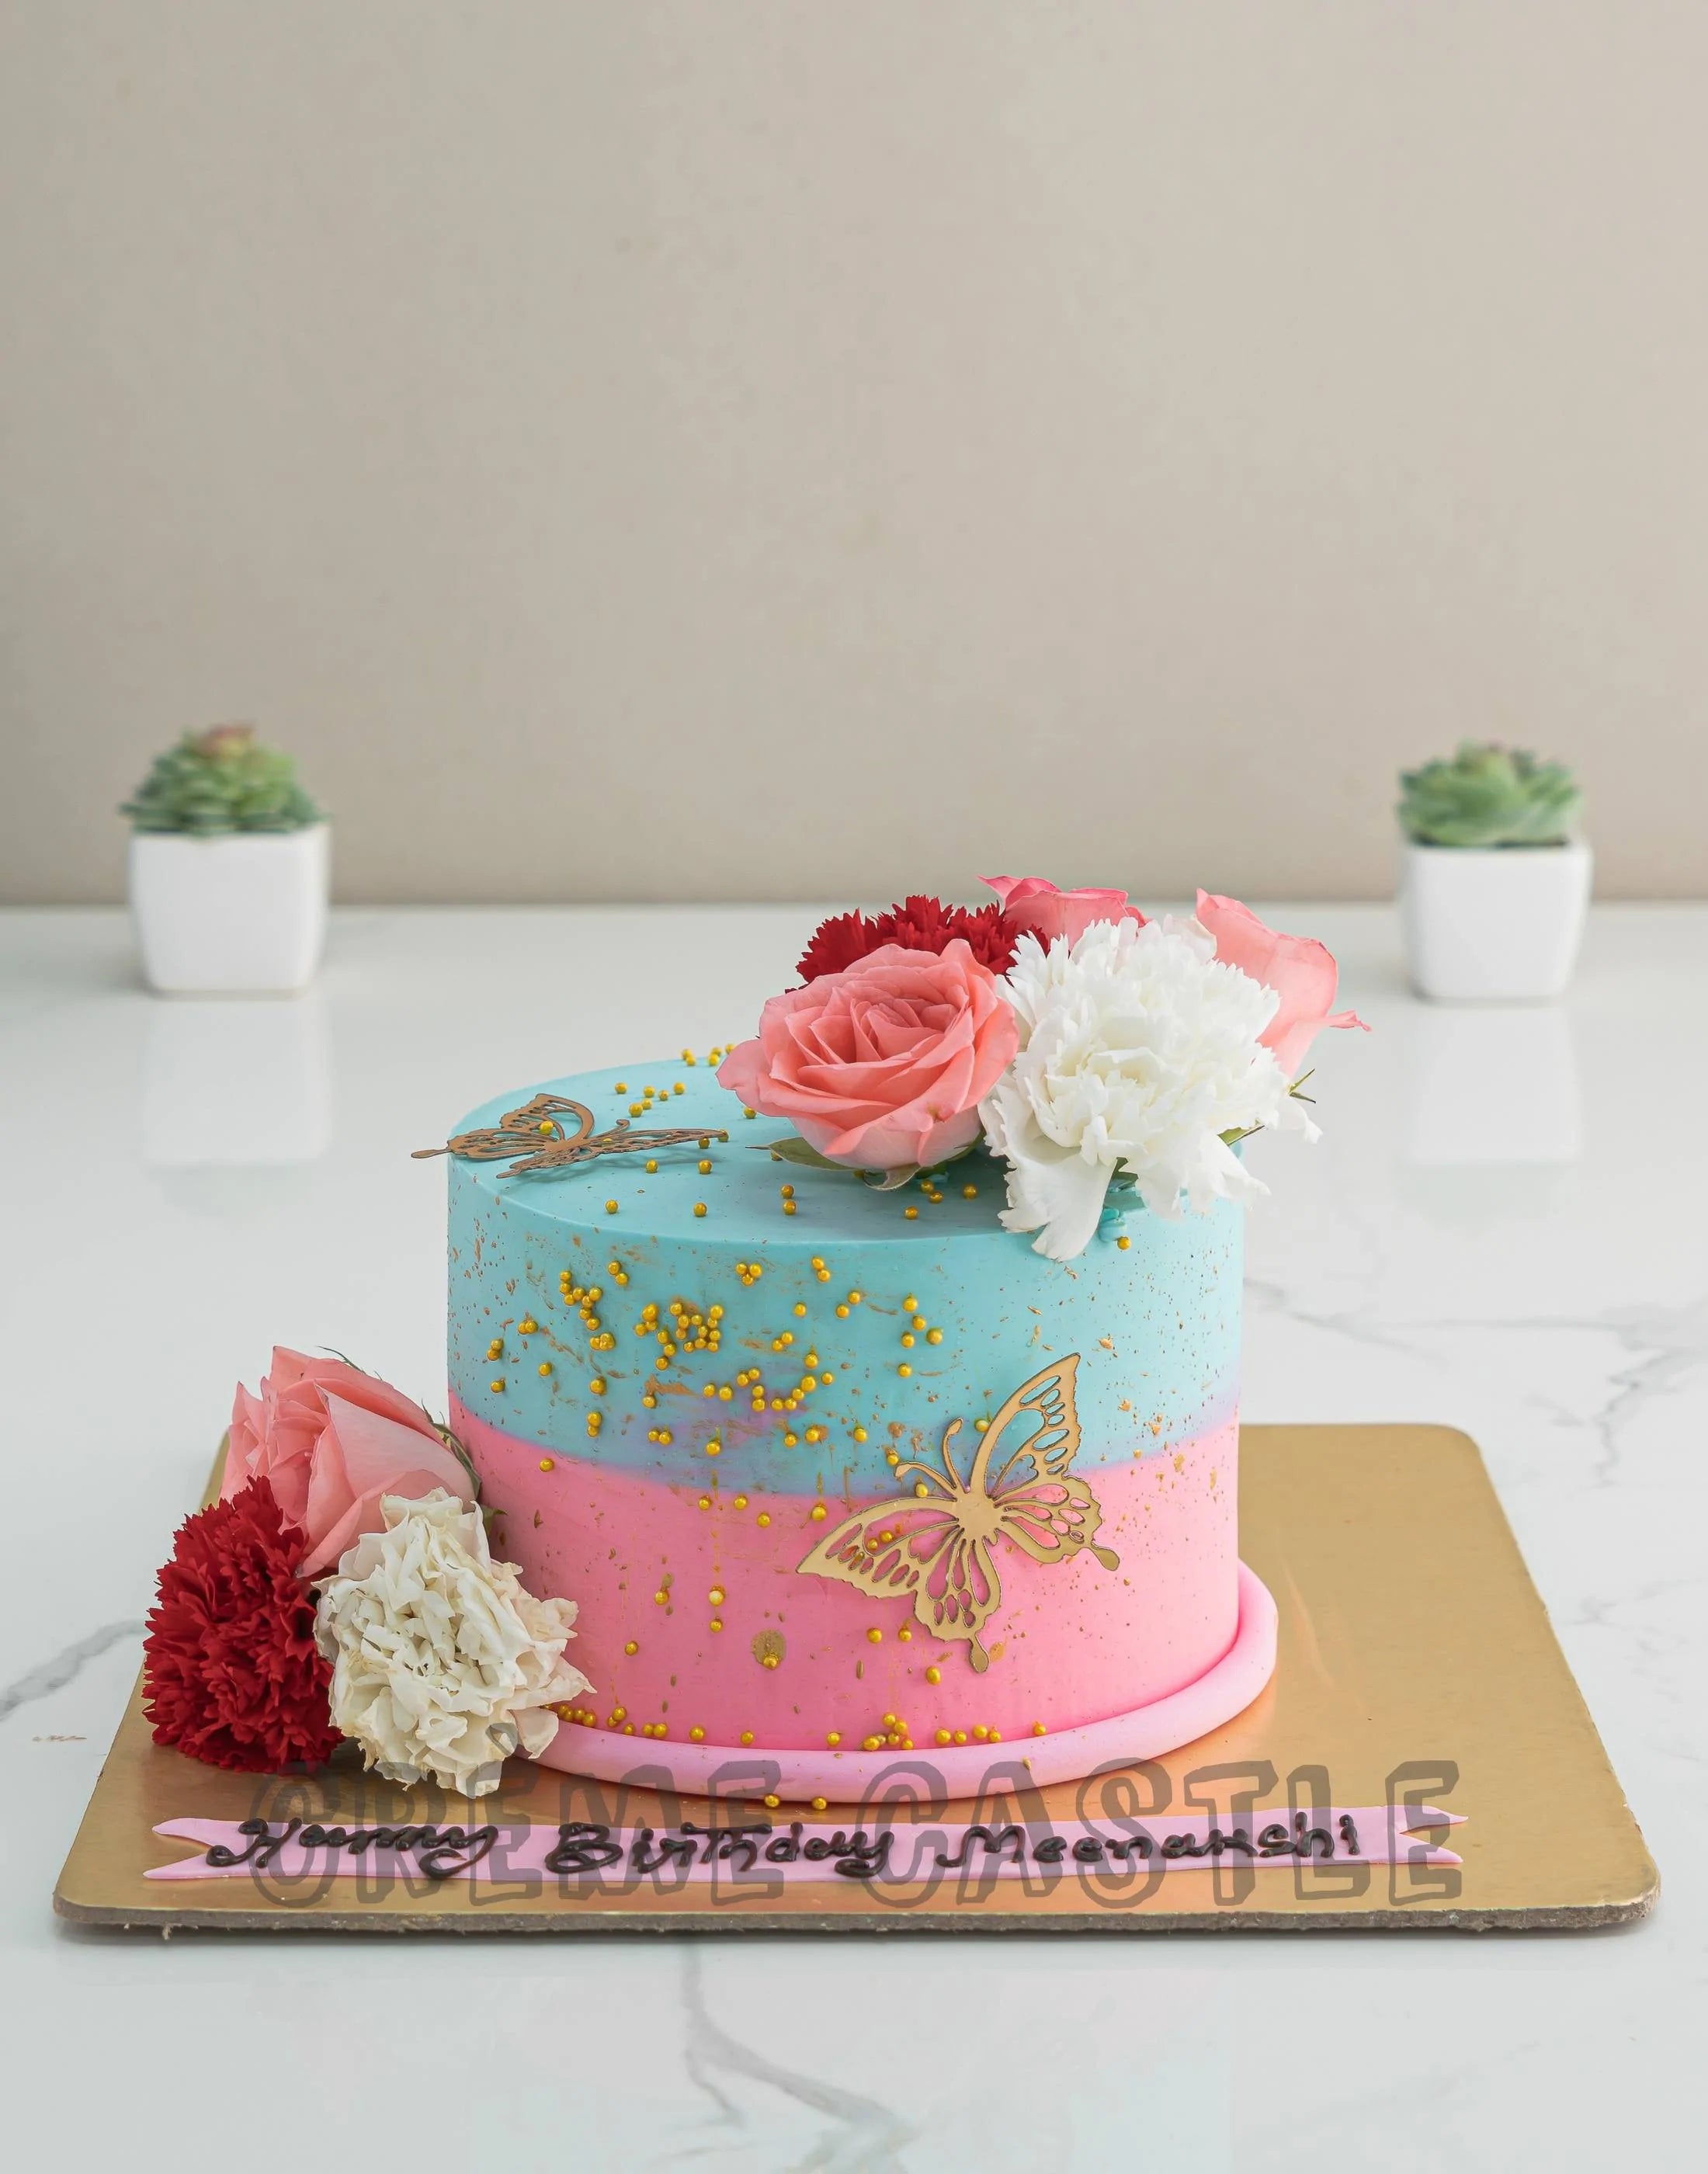 Floral Wedding Cake - Bakers Talent - Exotic Desserts, Customized Cakes,  Macarons, Cupcakes